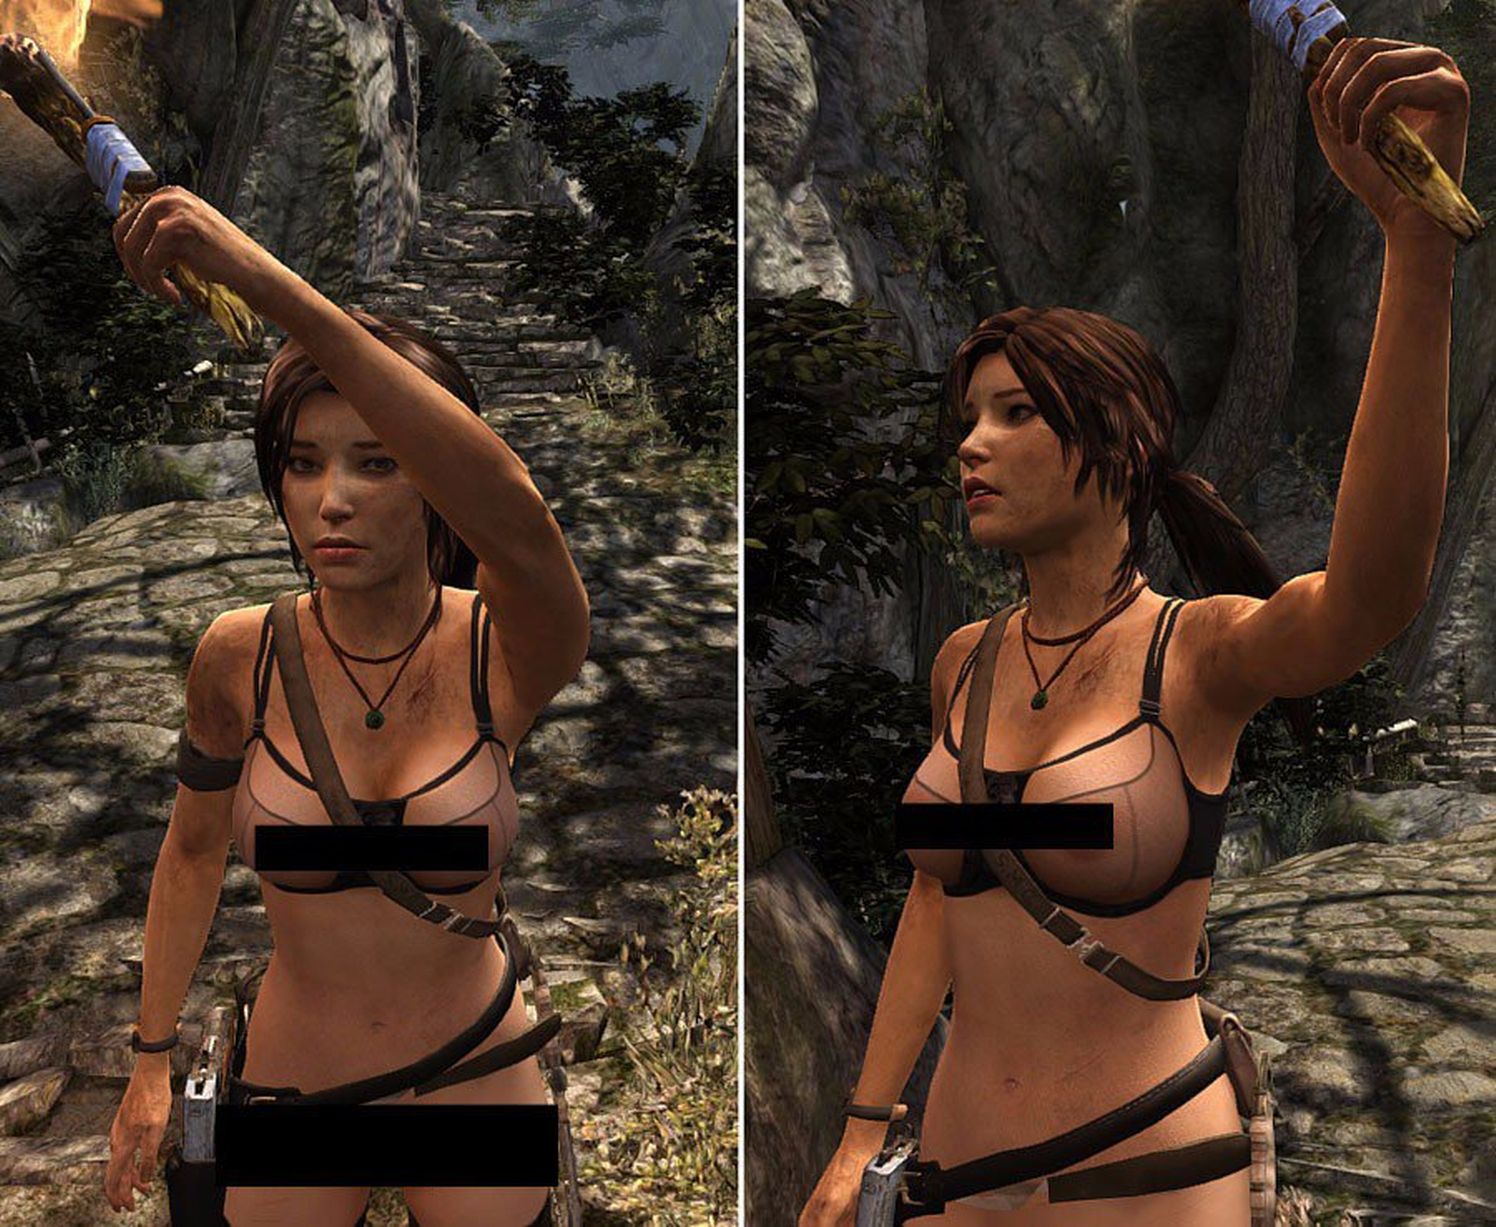 david primm recommends Sexy Lara Croft Naked